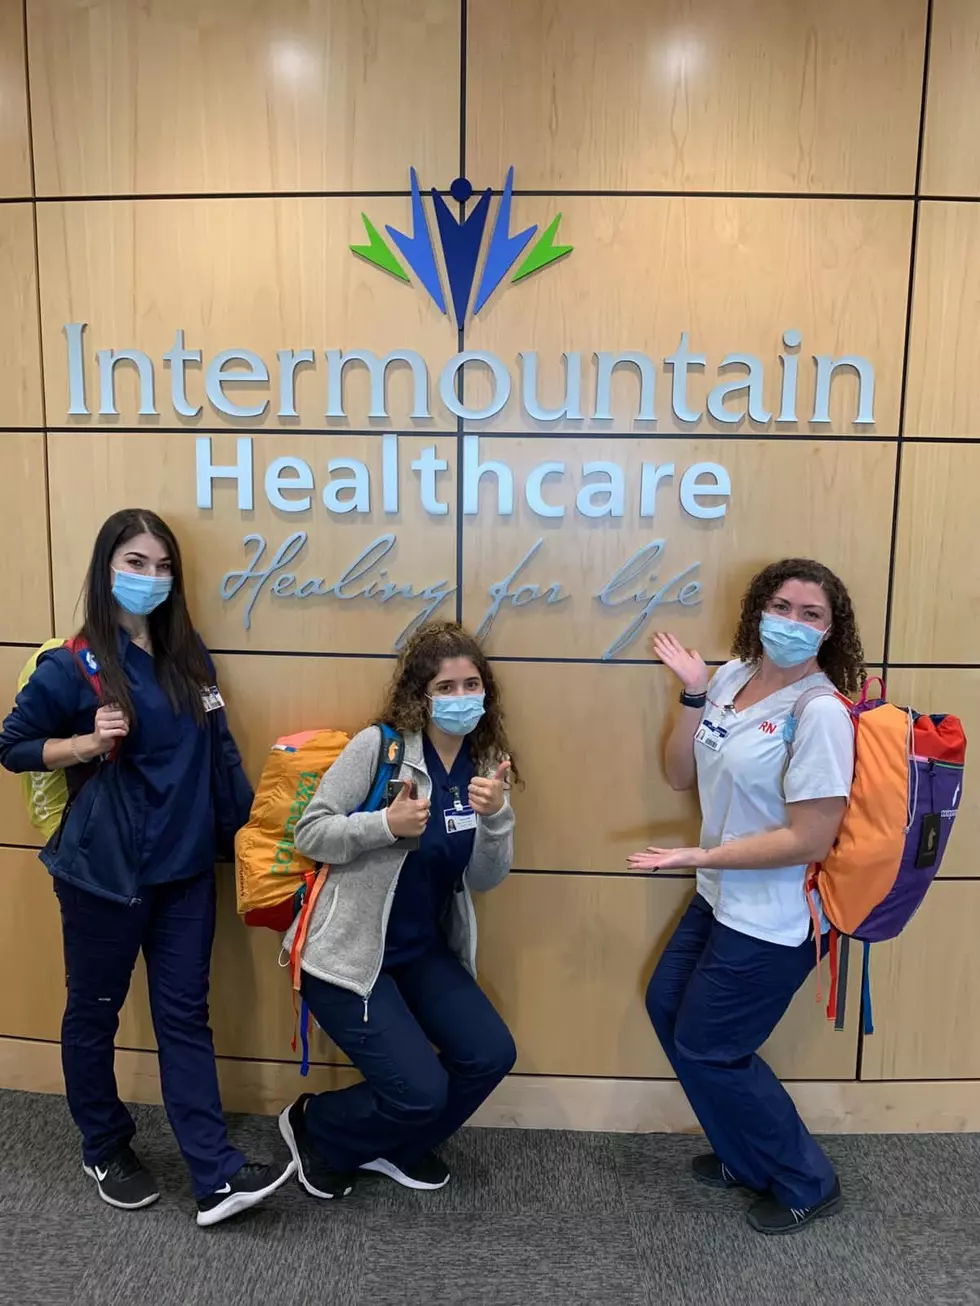 Intermountain Healthcare Welcomes NYC Nurses to Help Frontline Caregivers; Adds 200 Nurses to Assist in Response to Rising COVID-19 Hospitalizations